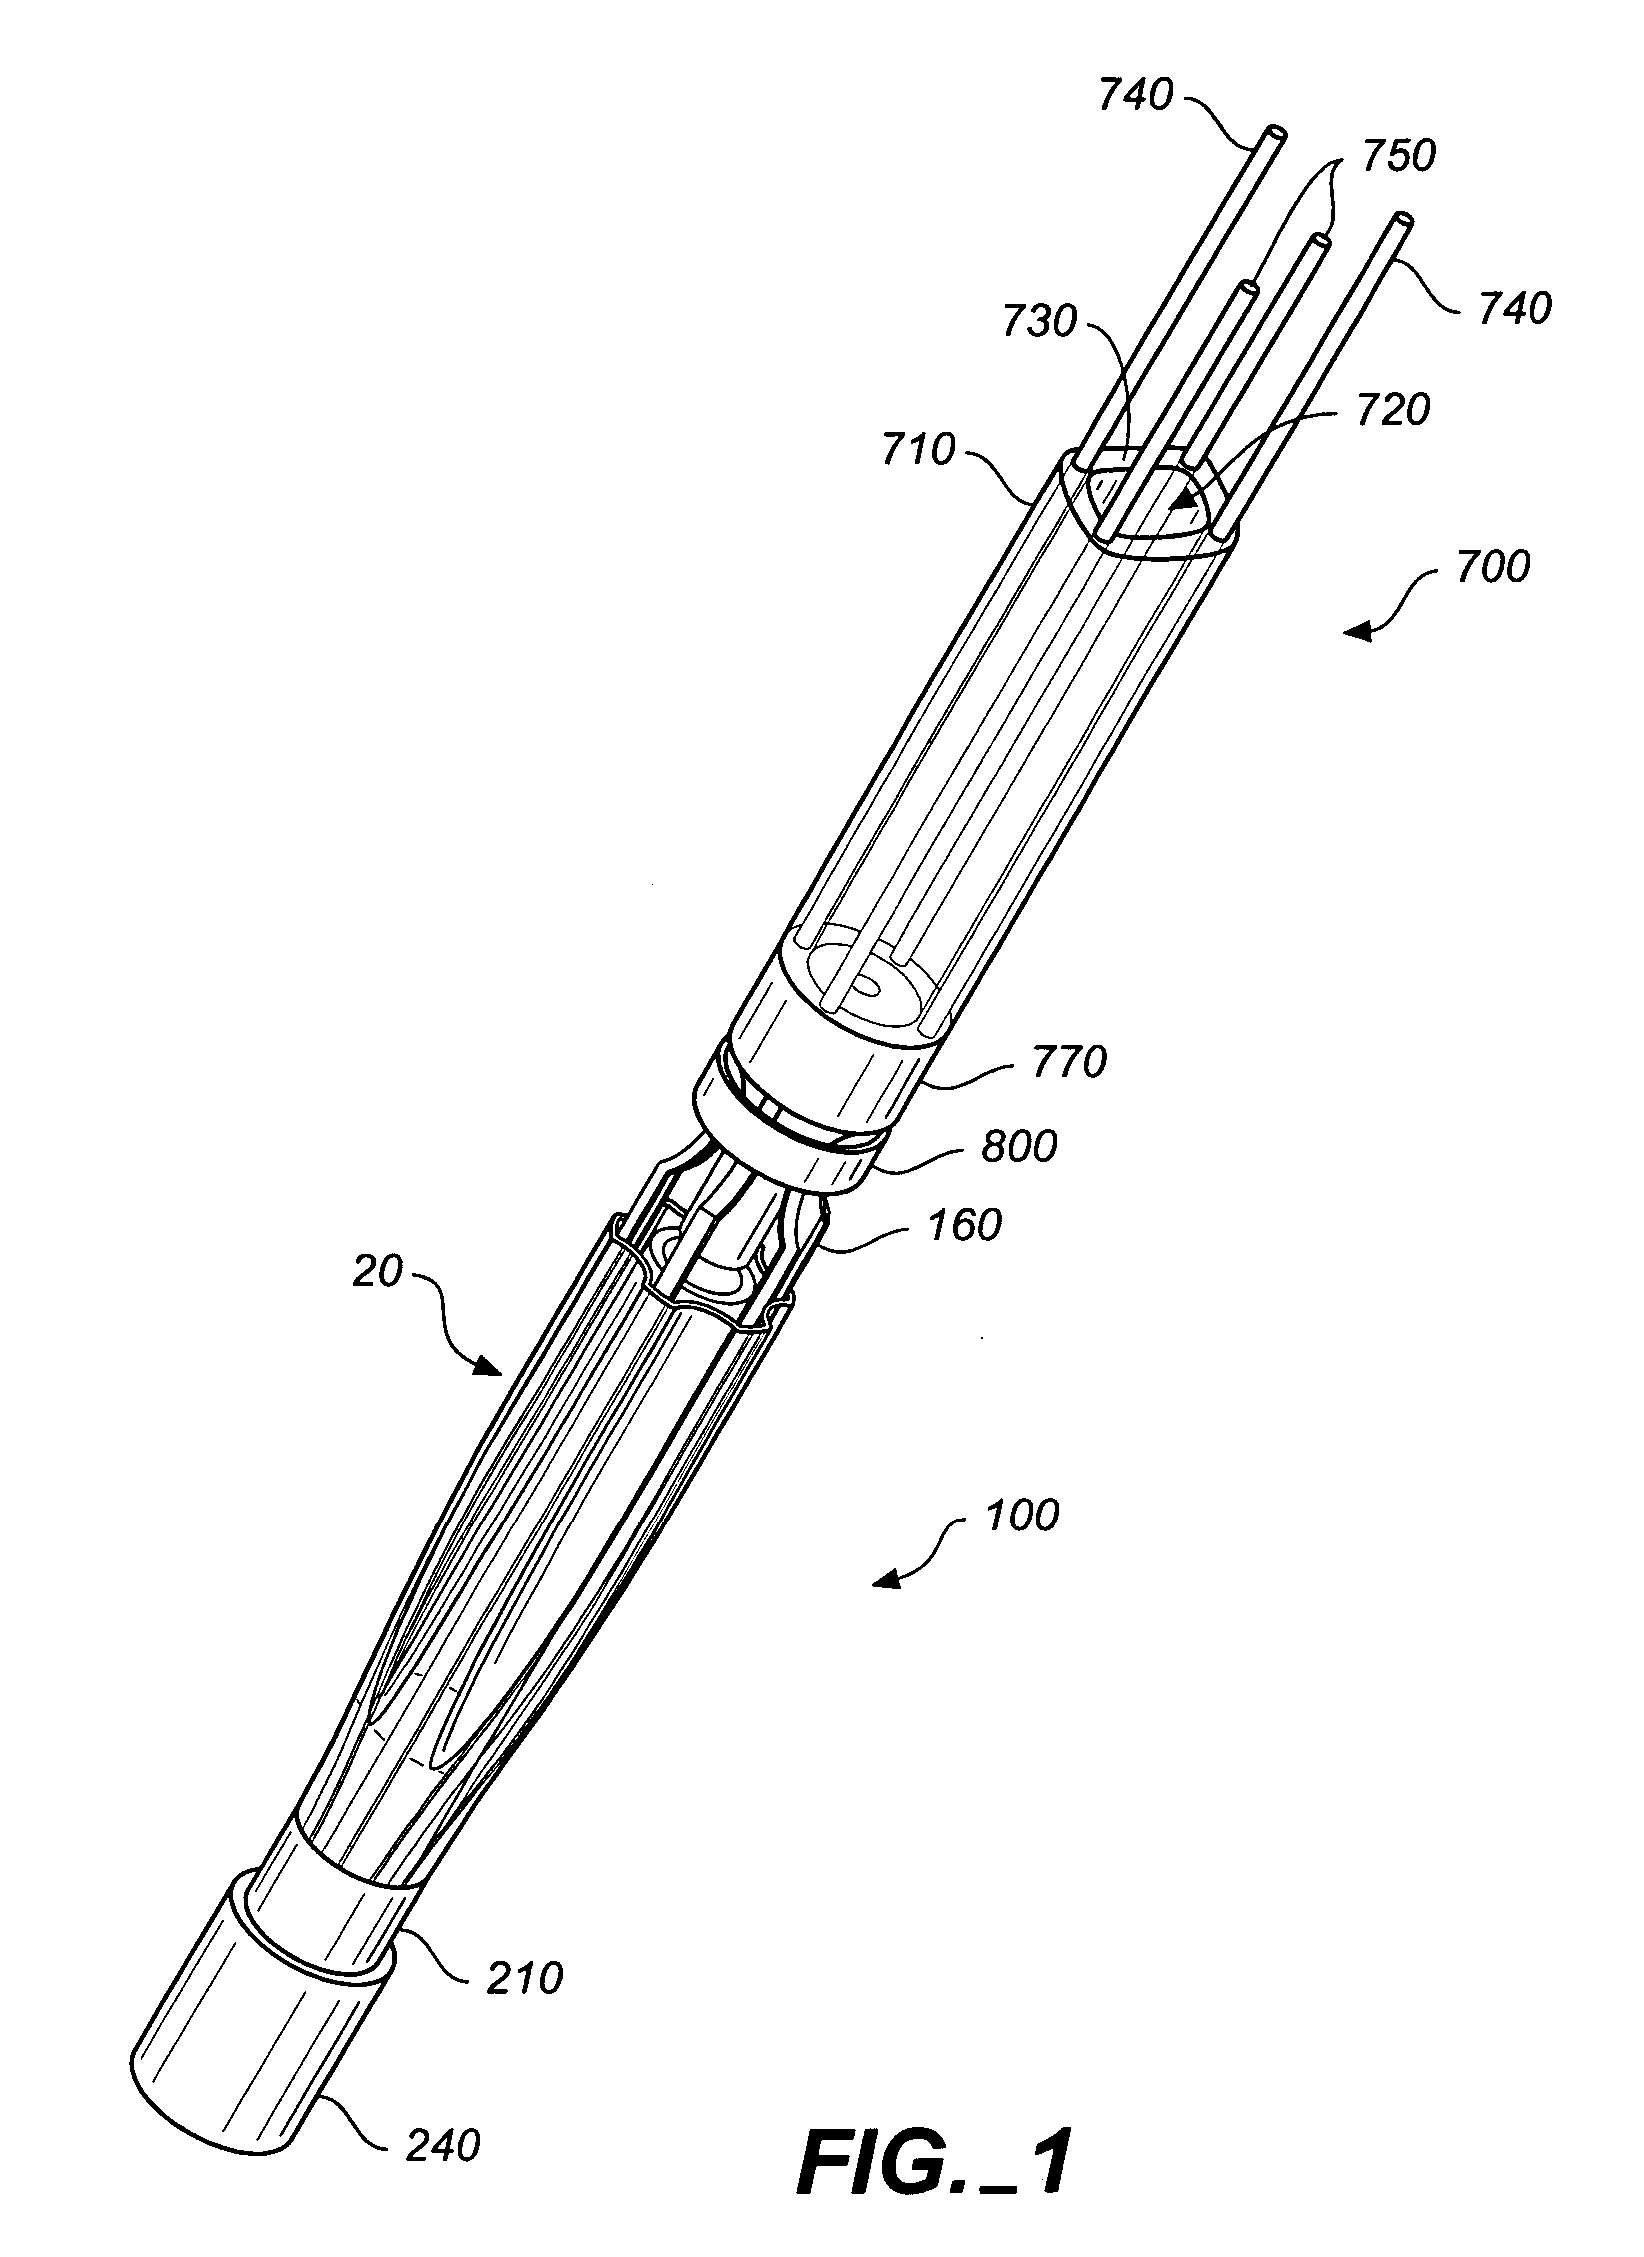 Intra-bronchial apparatus for aspiration and insufflation of lung regions distal to placement or cross communication and deployment and placement system therefor